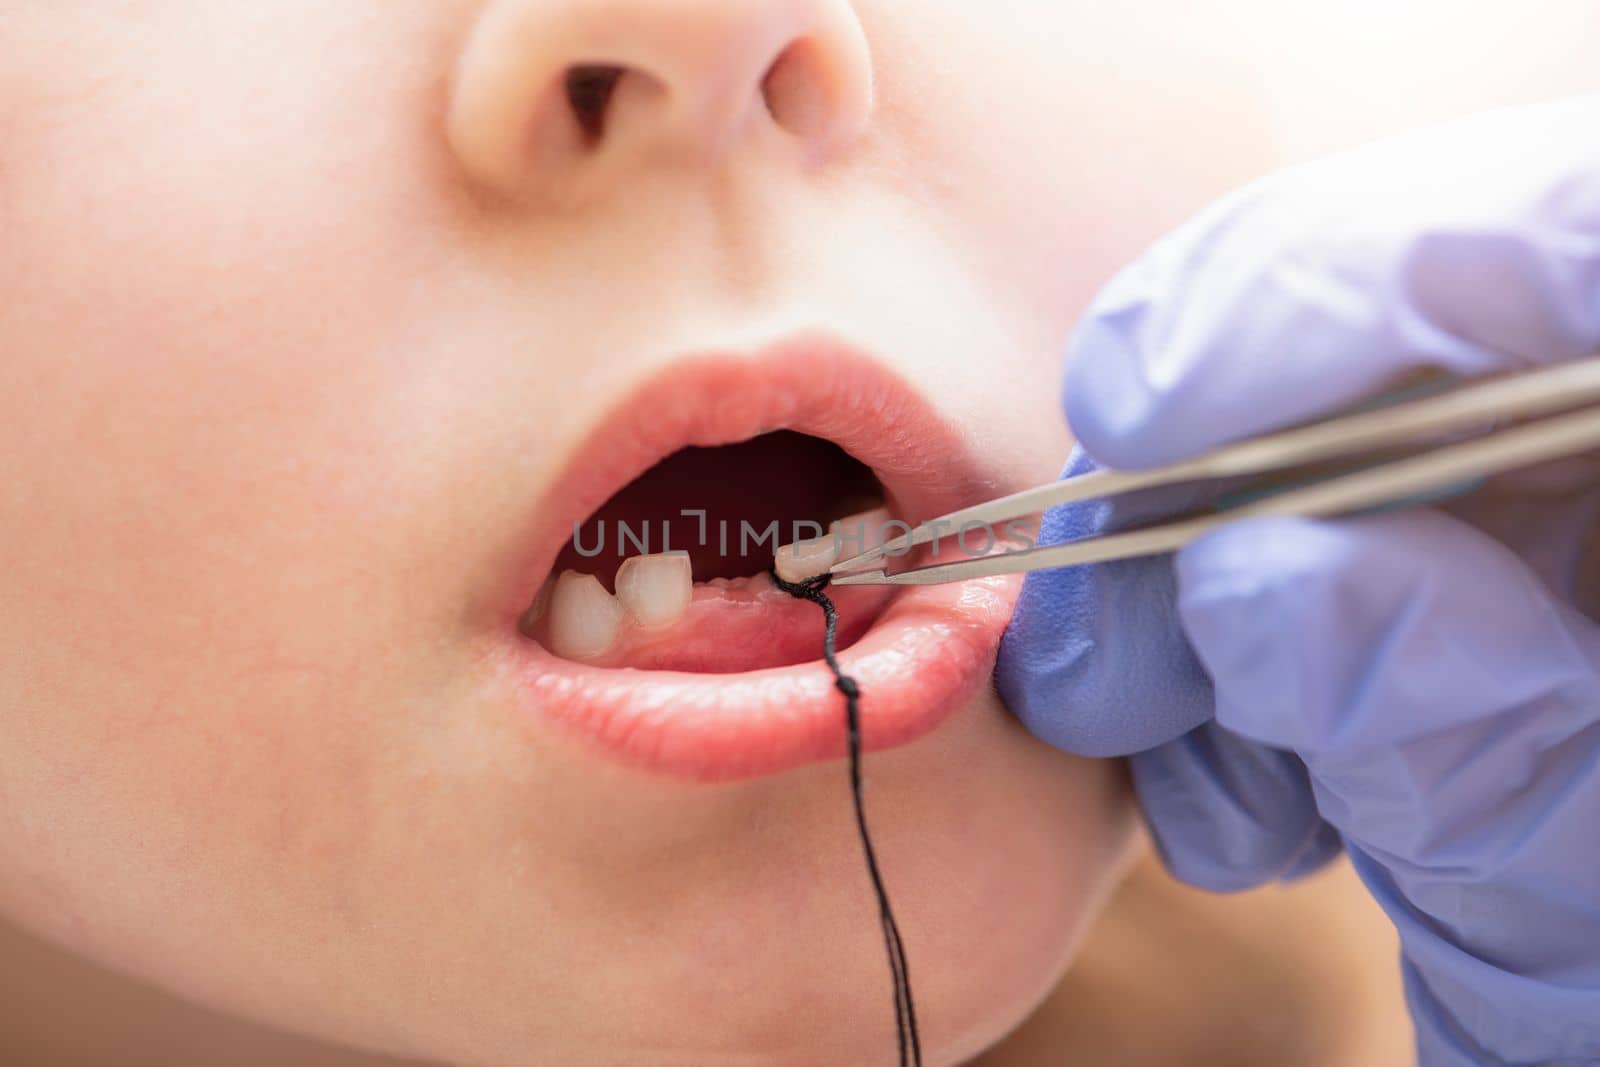 Extraction of a milk tooth in a child. Self-extraction of a tooth with a floss at home. Tie a floss to the tooth to extract it